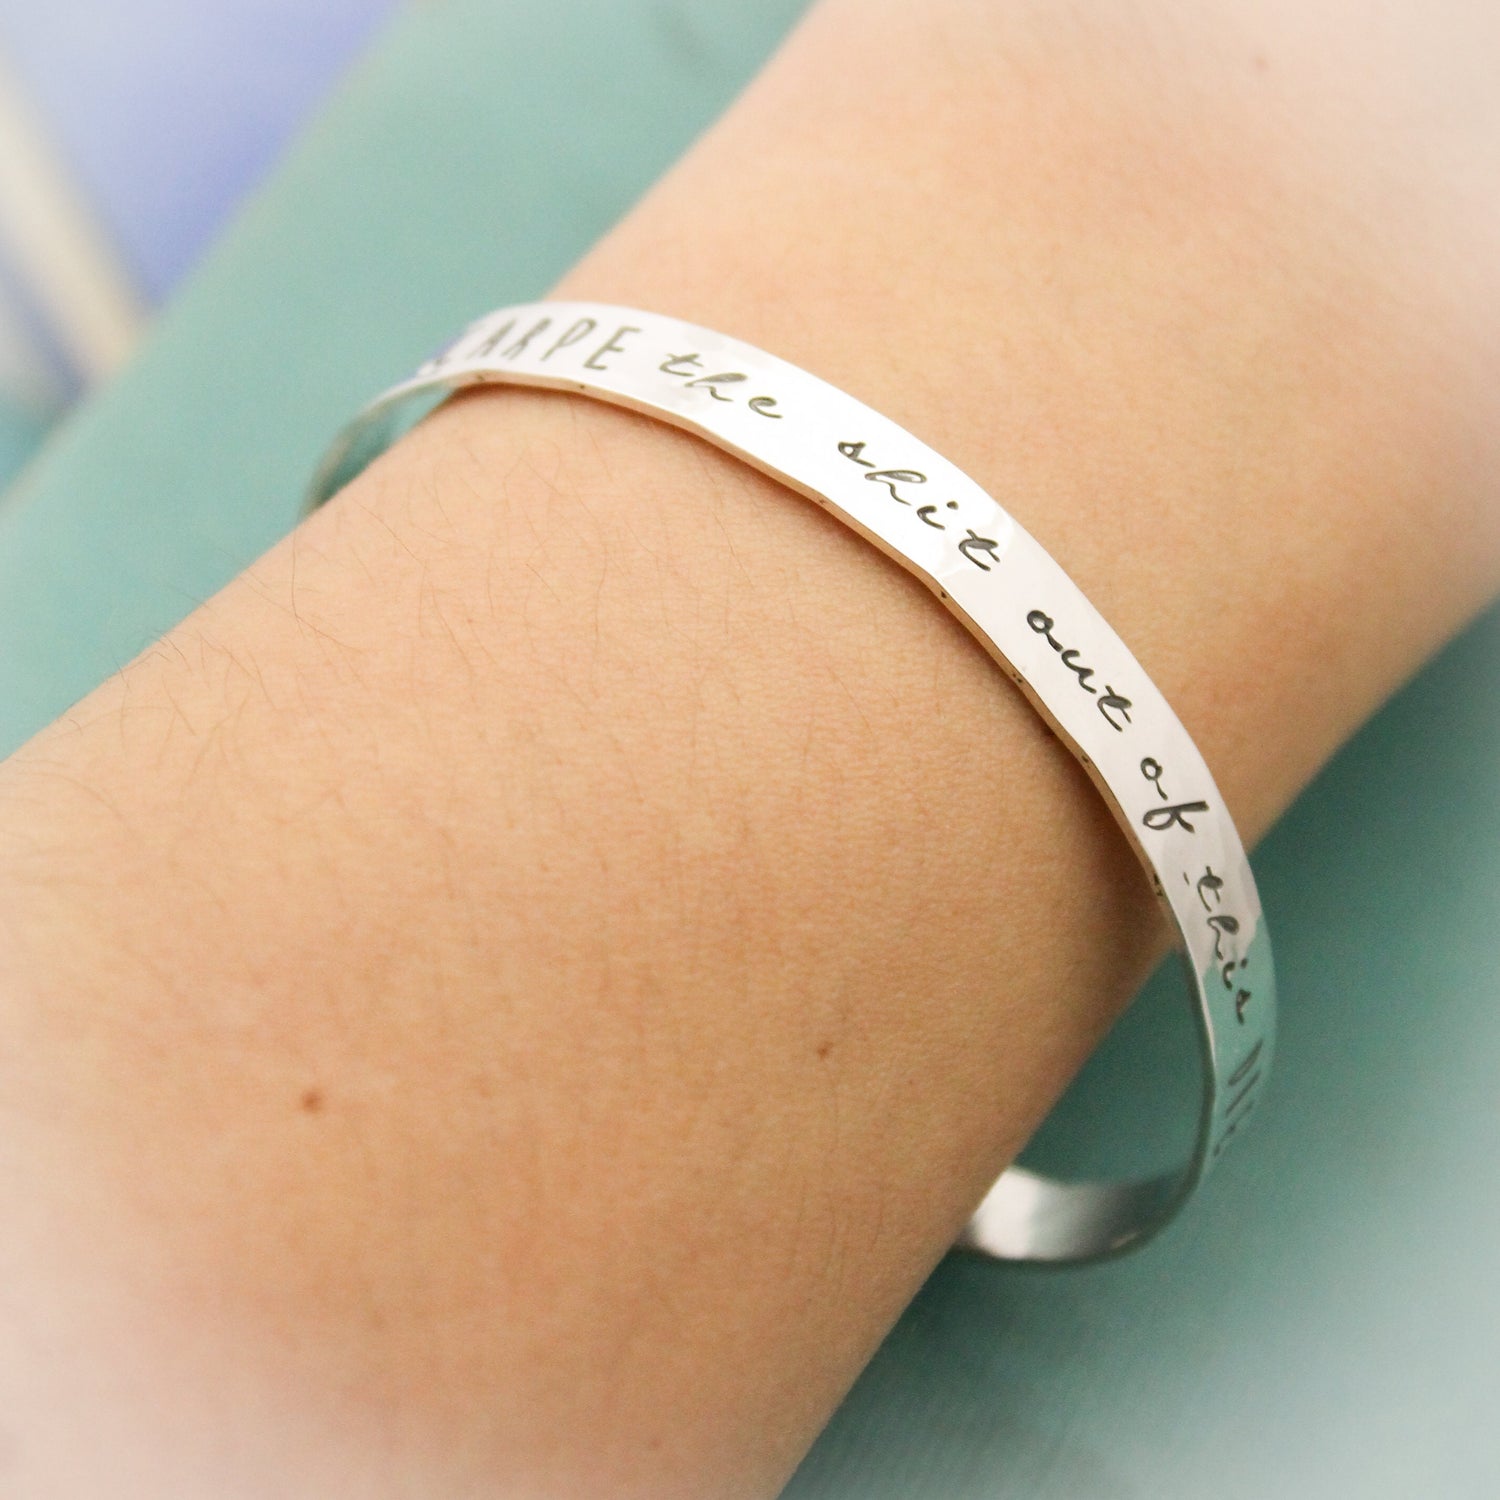 Carpe the shit out of this Diem Cuff Bracelet, Sterling Silver Cuff Bangle, Personalized Hand Stamped Cuff Bangle Bracelet, Inspirational